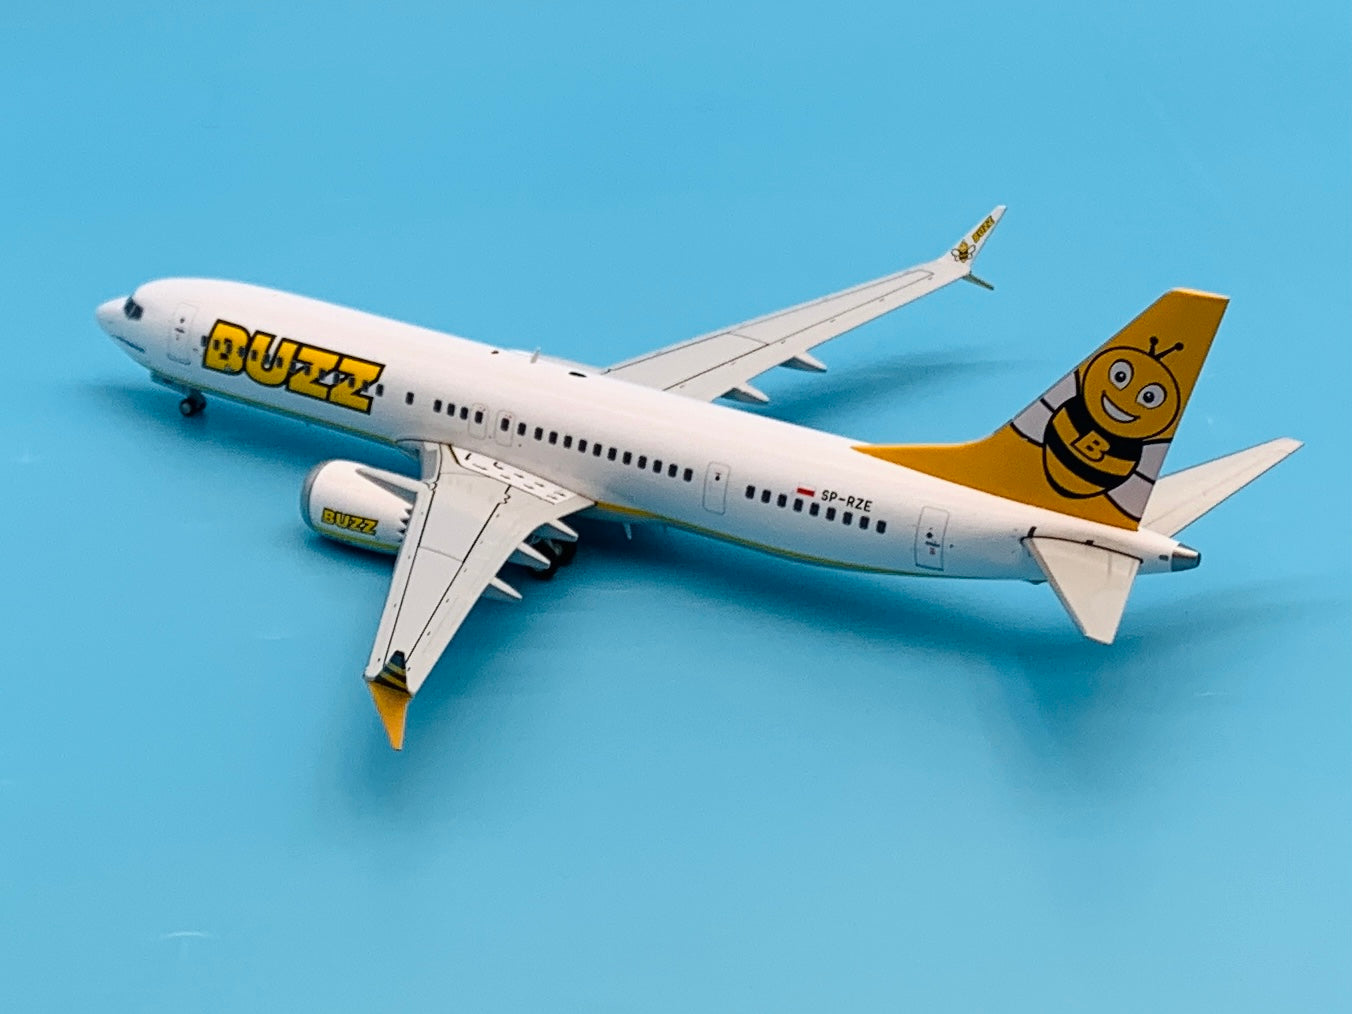 JC Wings 1/200 Buzz Poland Boeing 737-8 Max SP-RZB – First Class